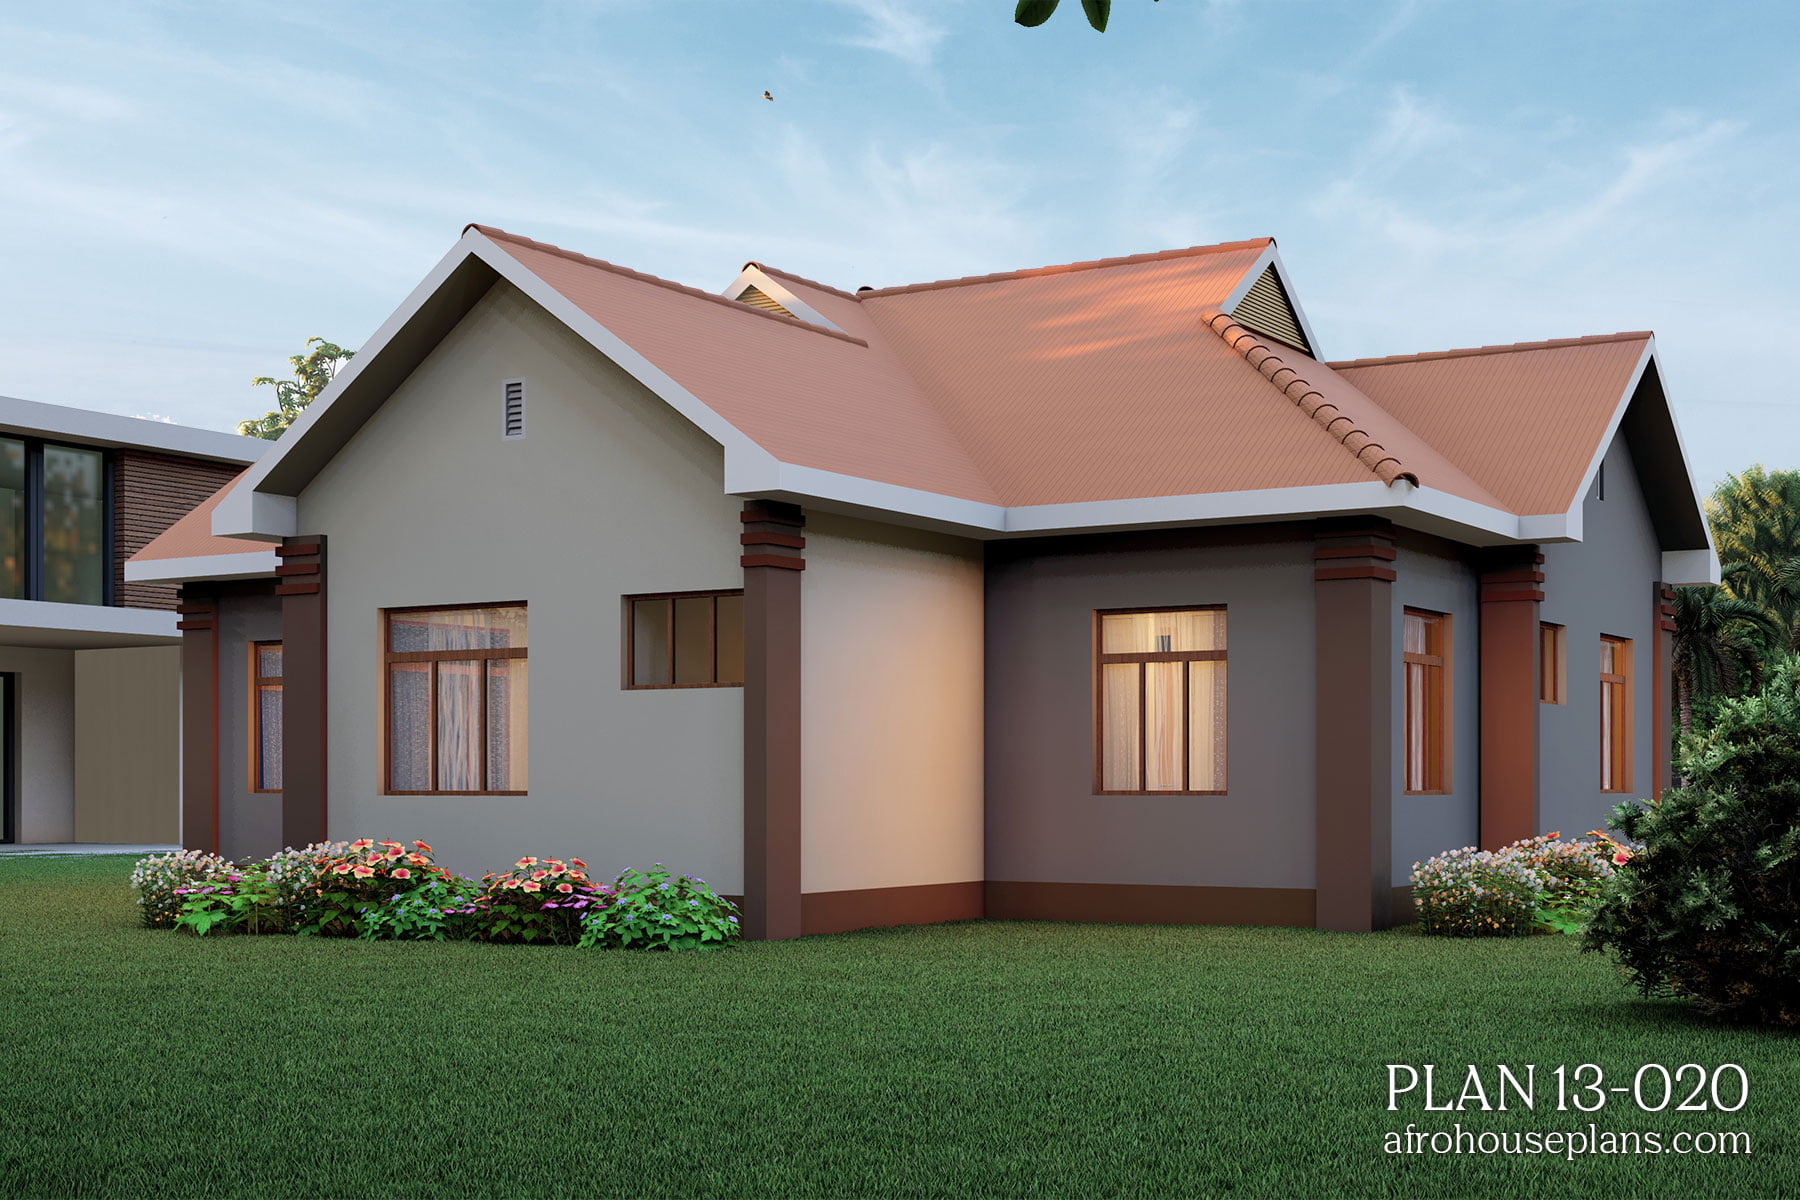 4 Bedrooms Single Story House Plan